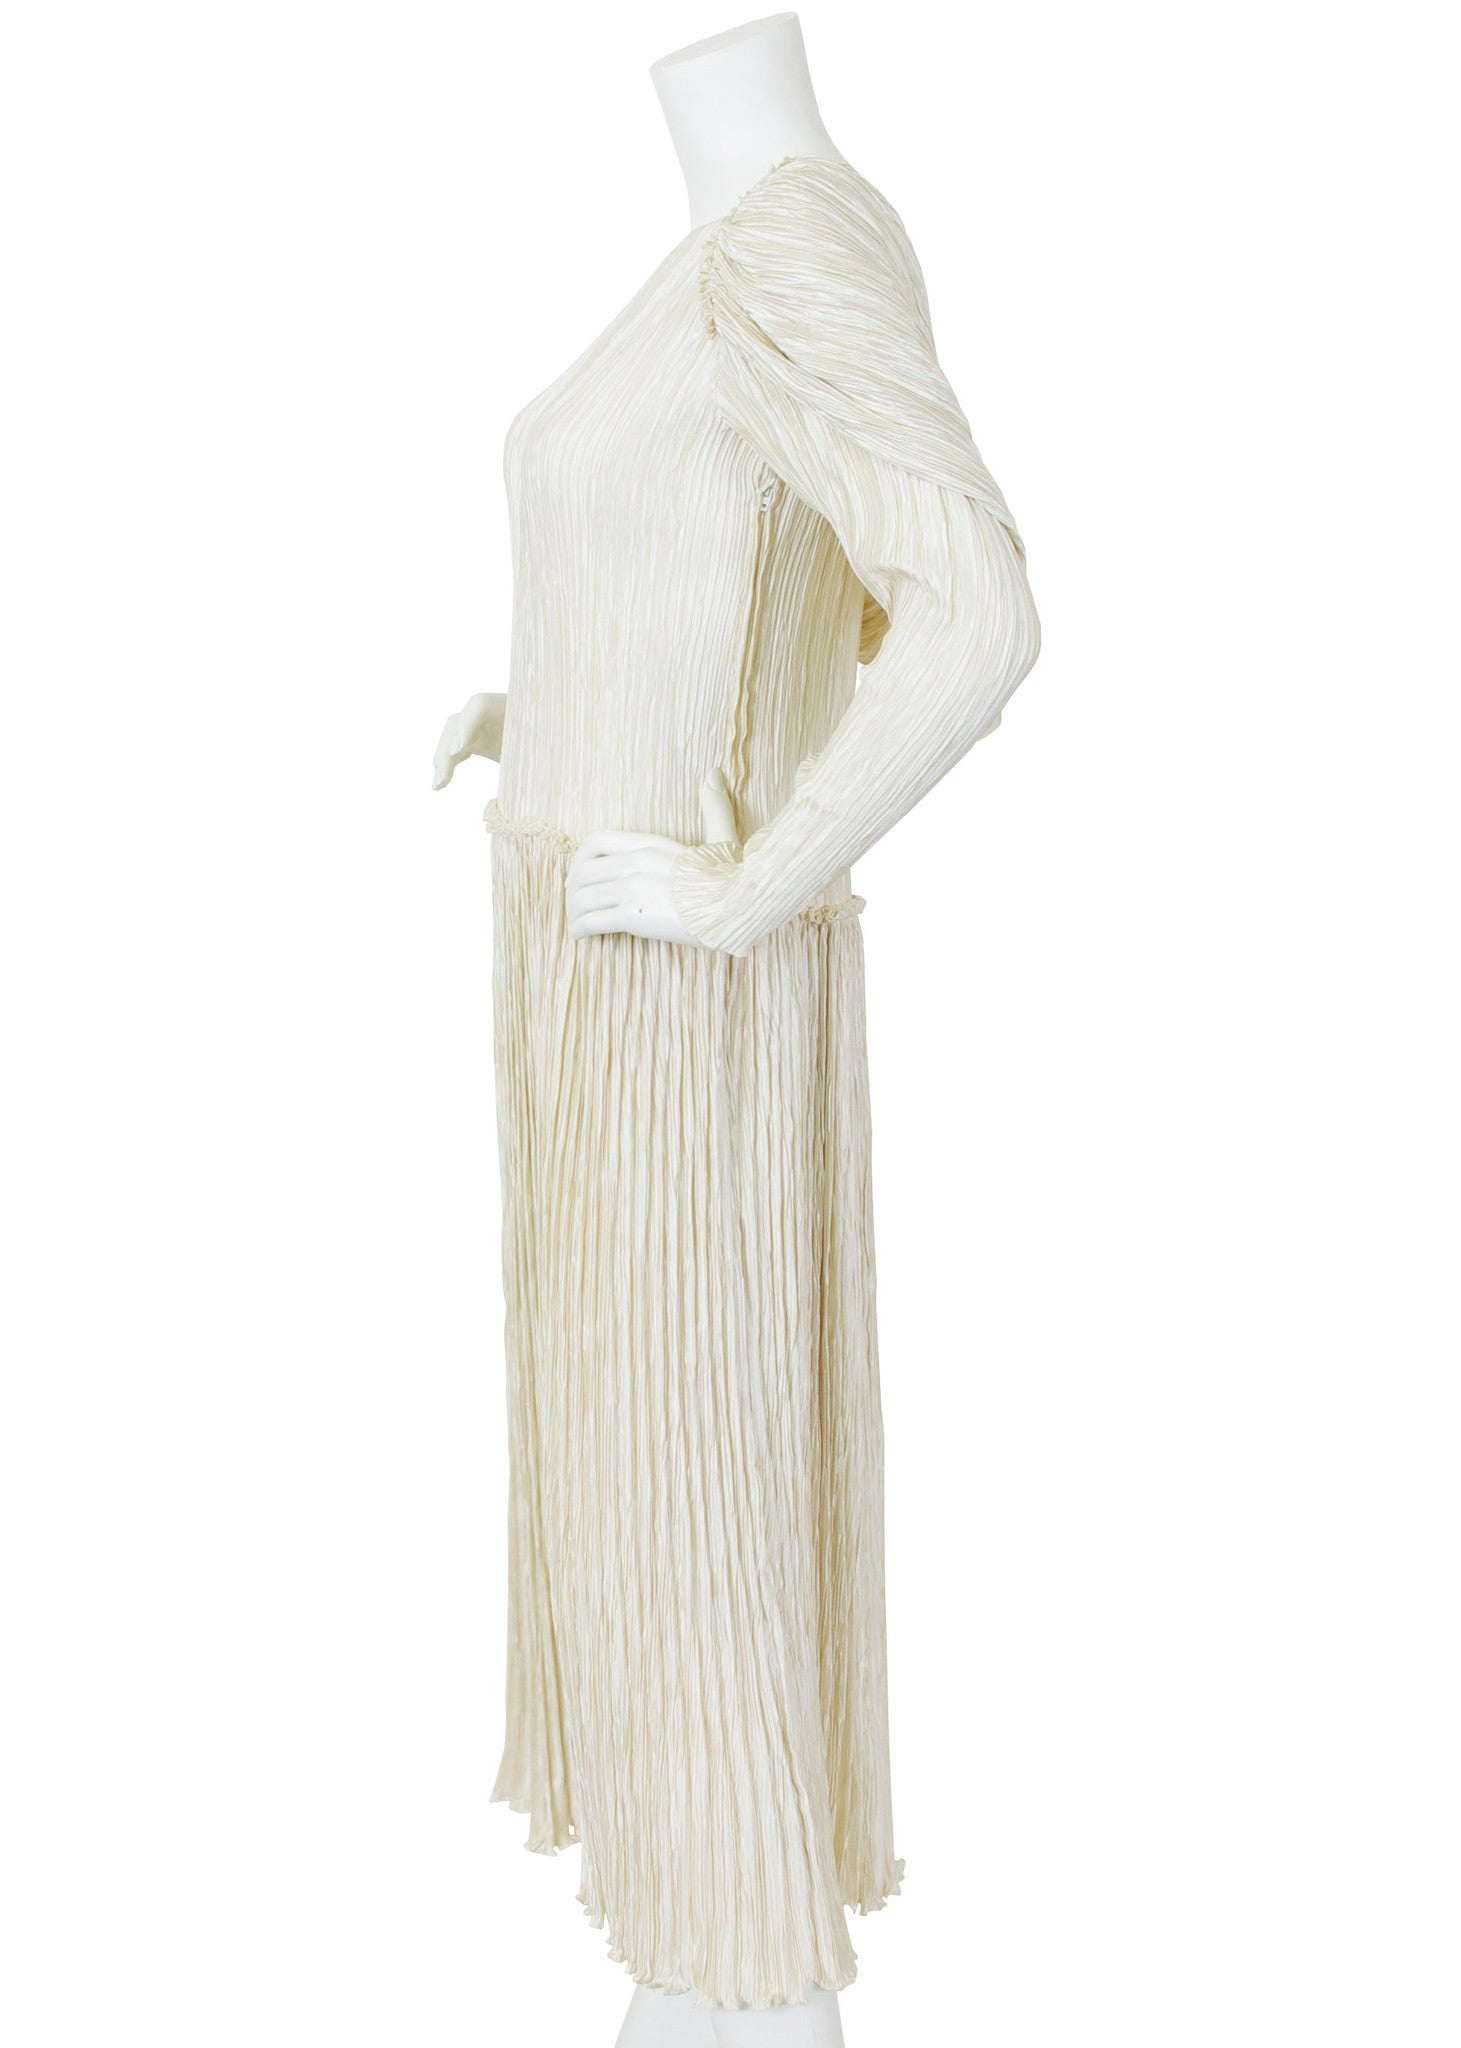 1985 Couture Cream Fortuny Pleat Cape Back Dress